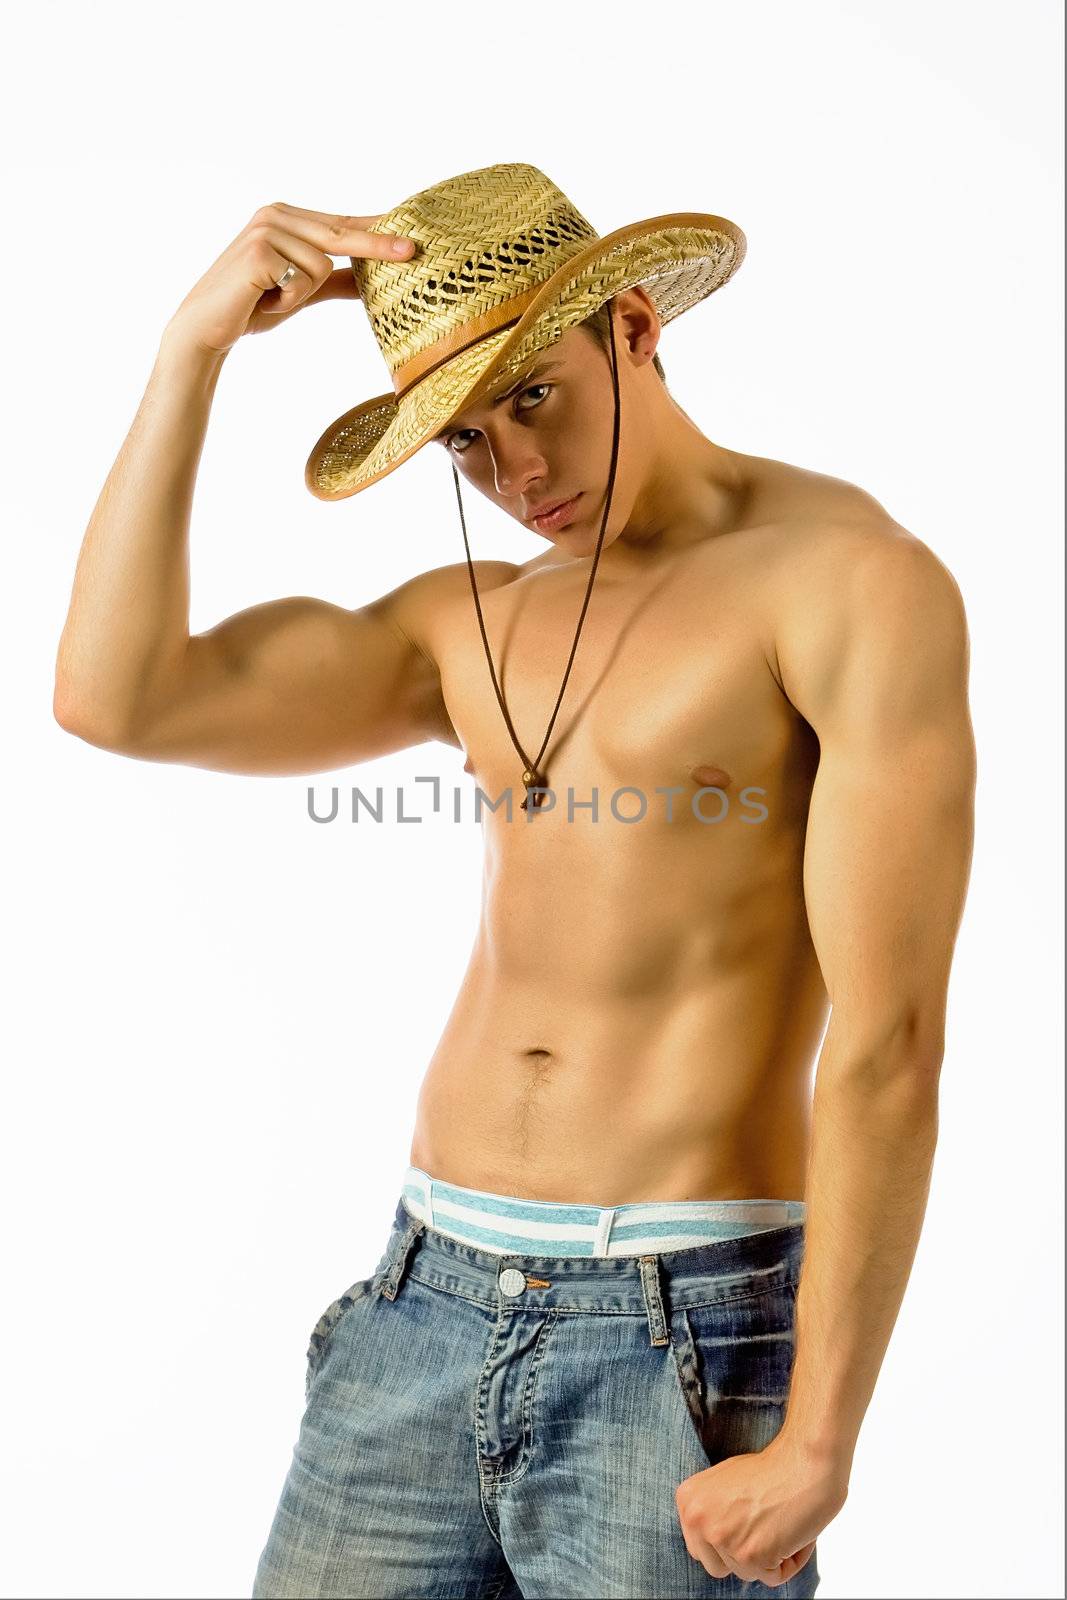 The beautiful young man in a straw hat